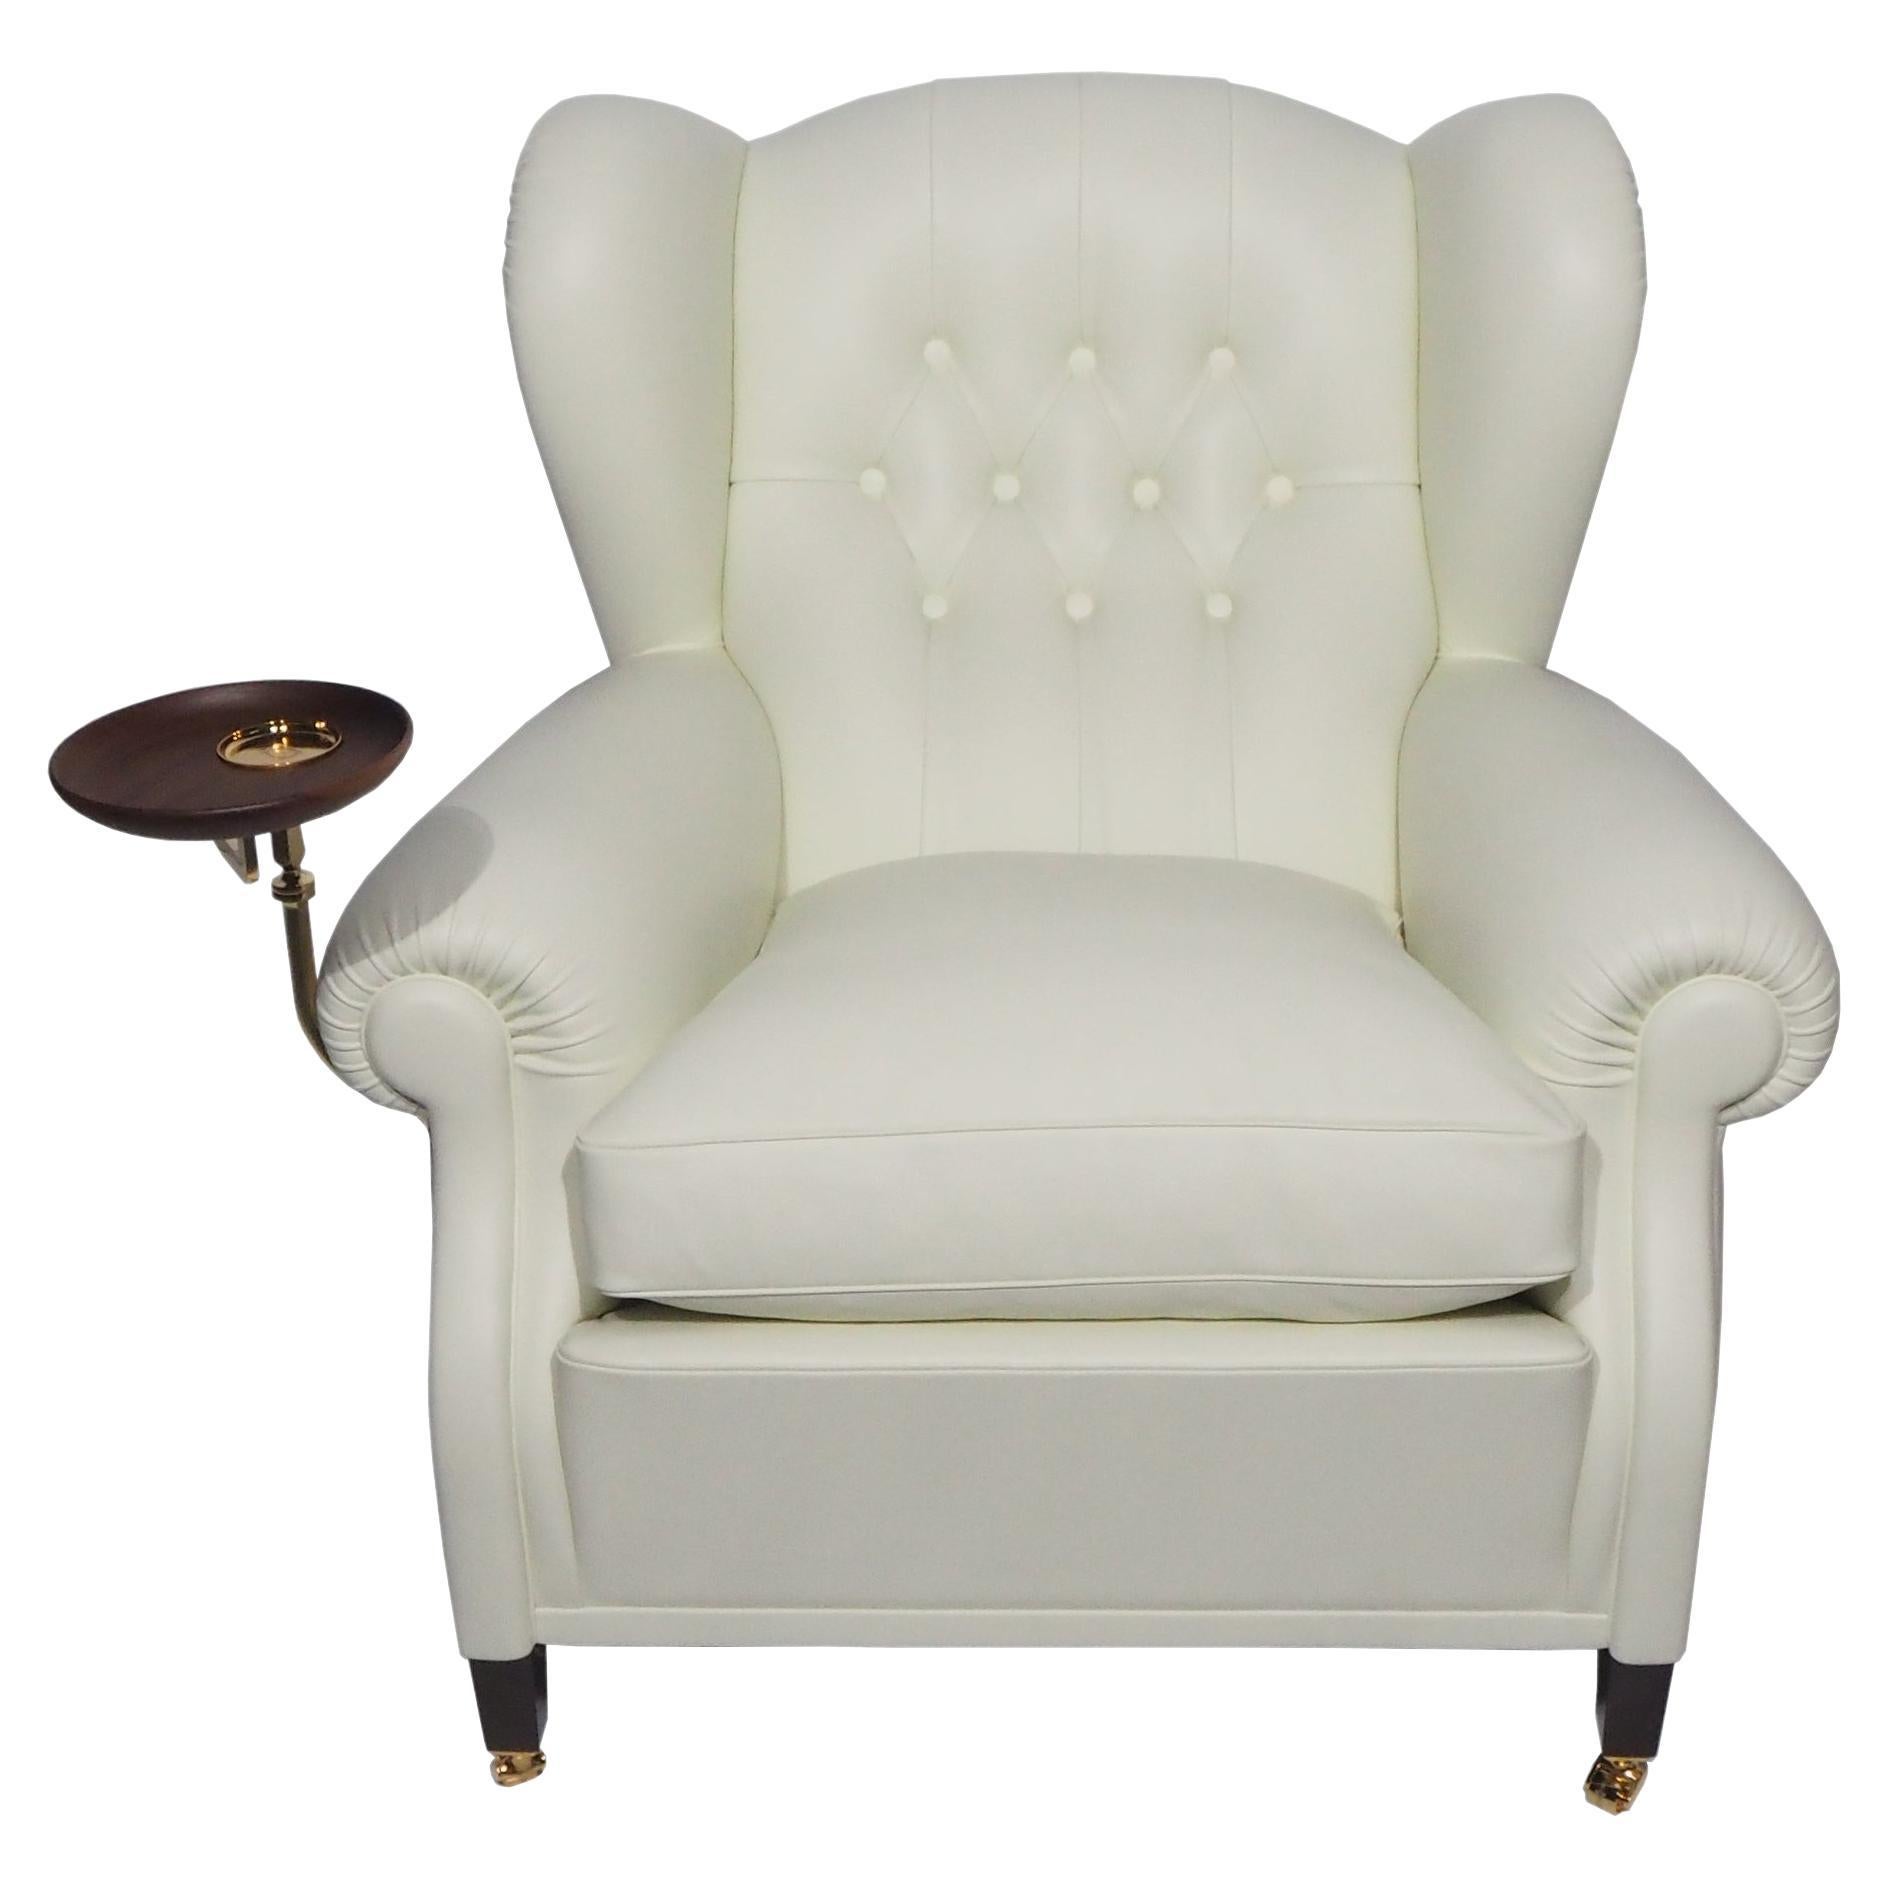 1919 Armchair Bergere Model in Pelle SC 0 Polare Leather with Ashtray For Sale